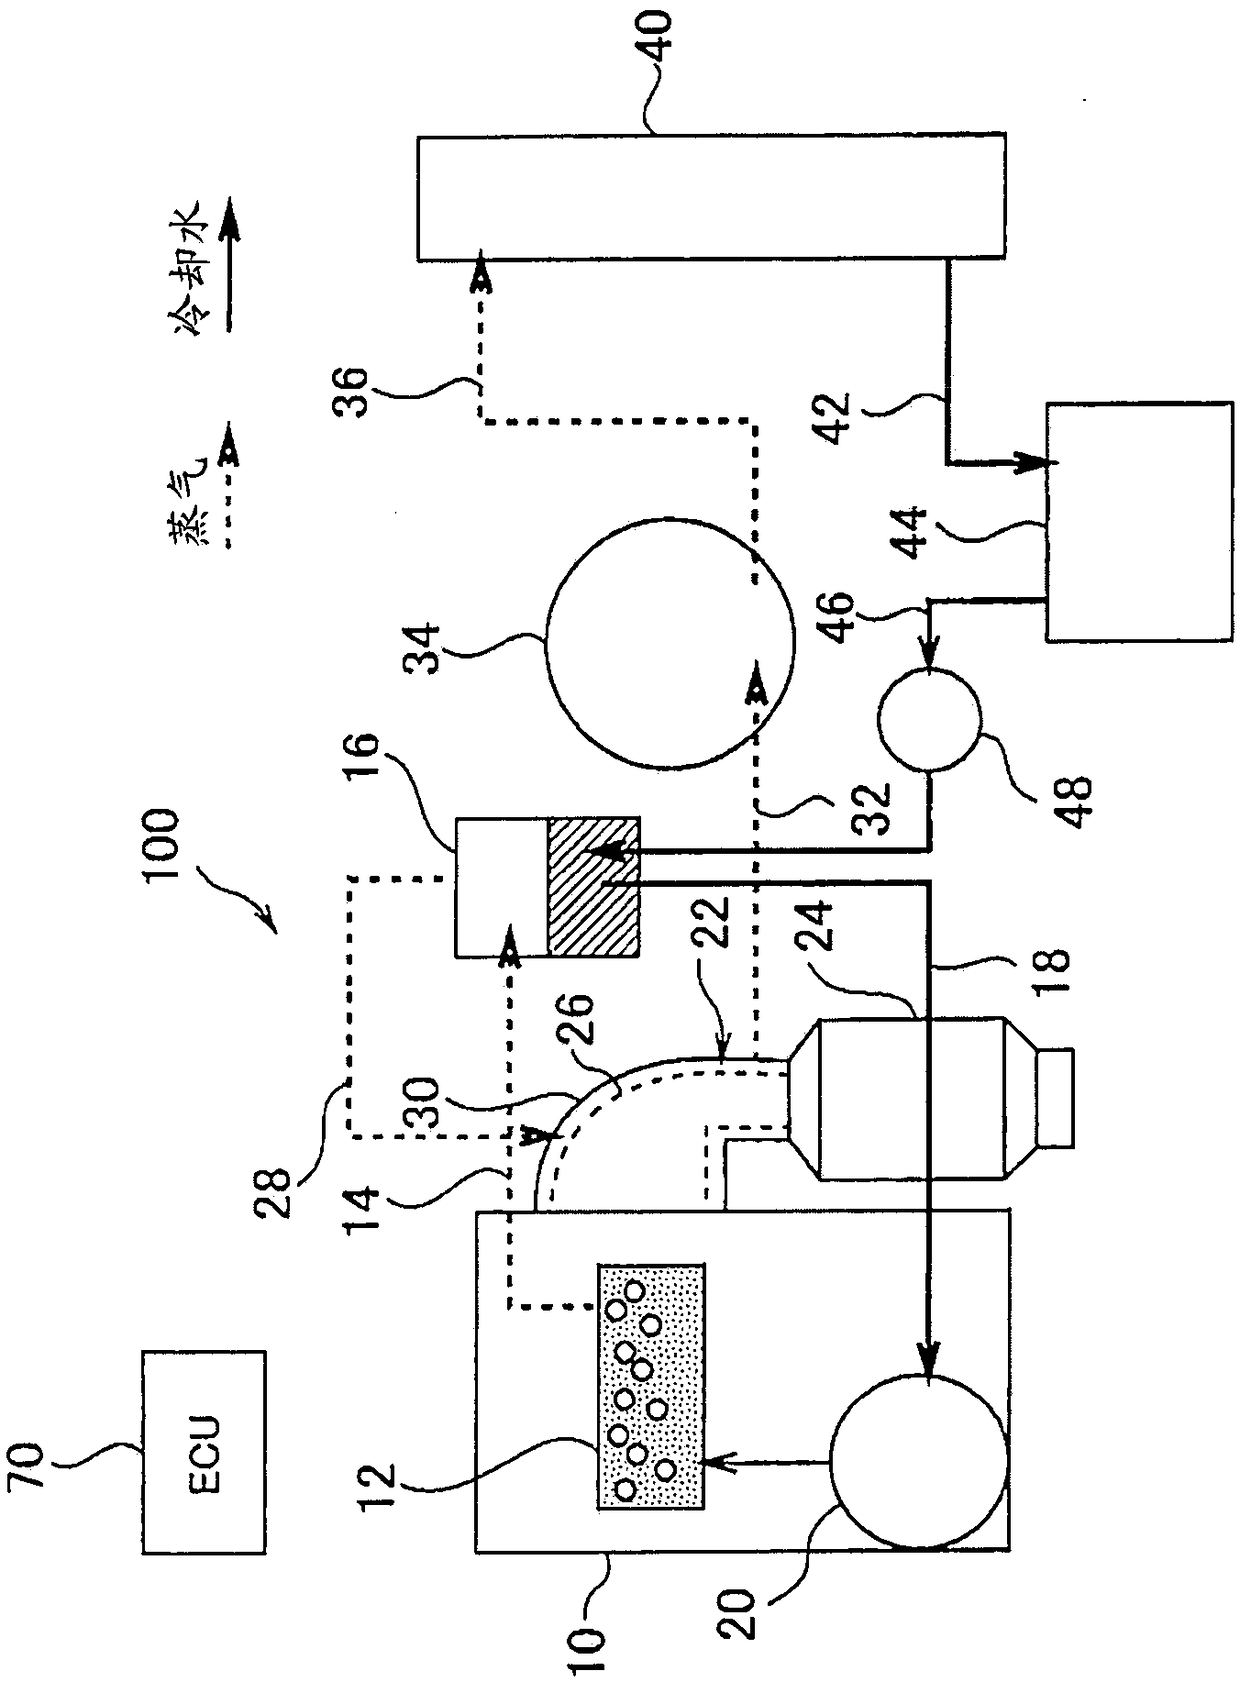 Rankine cycle system for vehicles